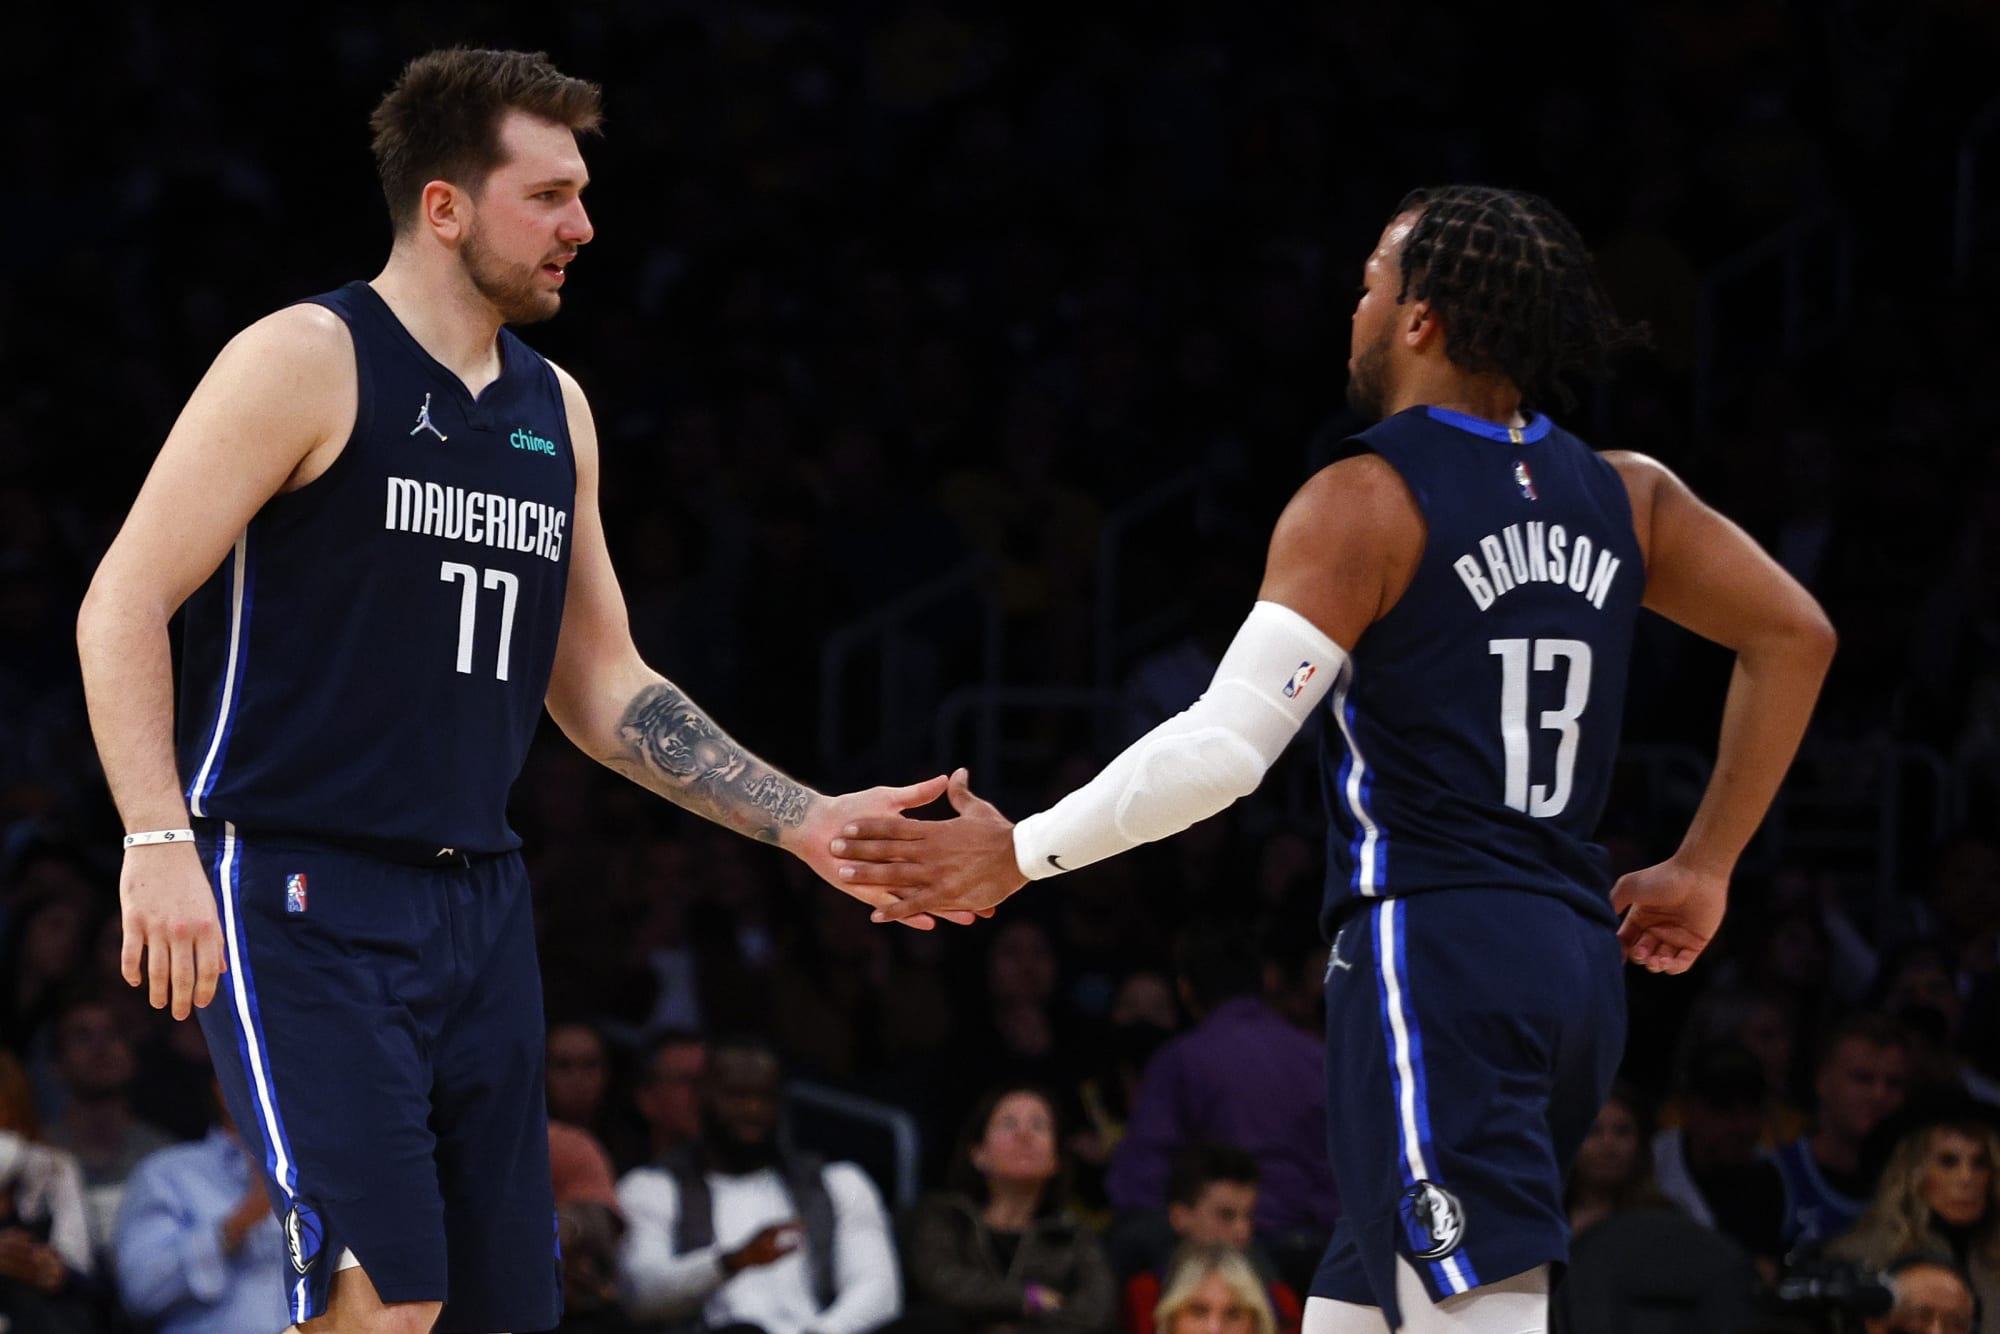 Luka Doncic is 22, Jalen Brunson is surging, and the Mavs' 2018